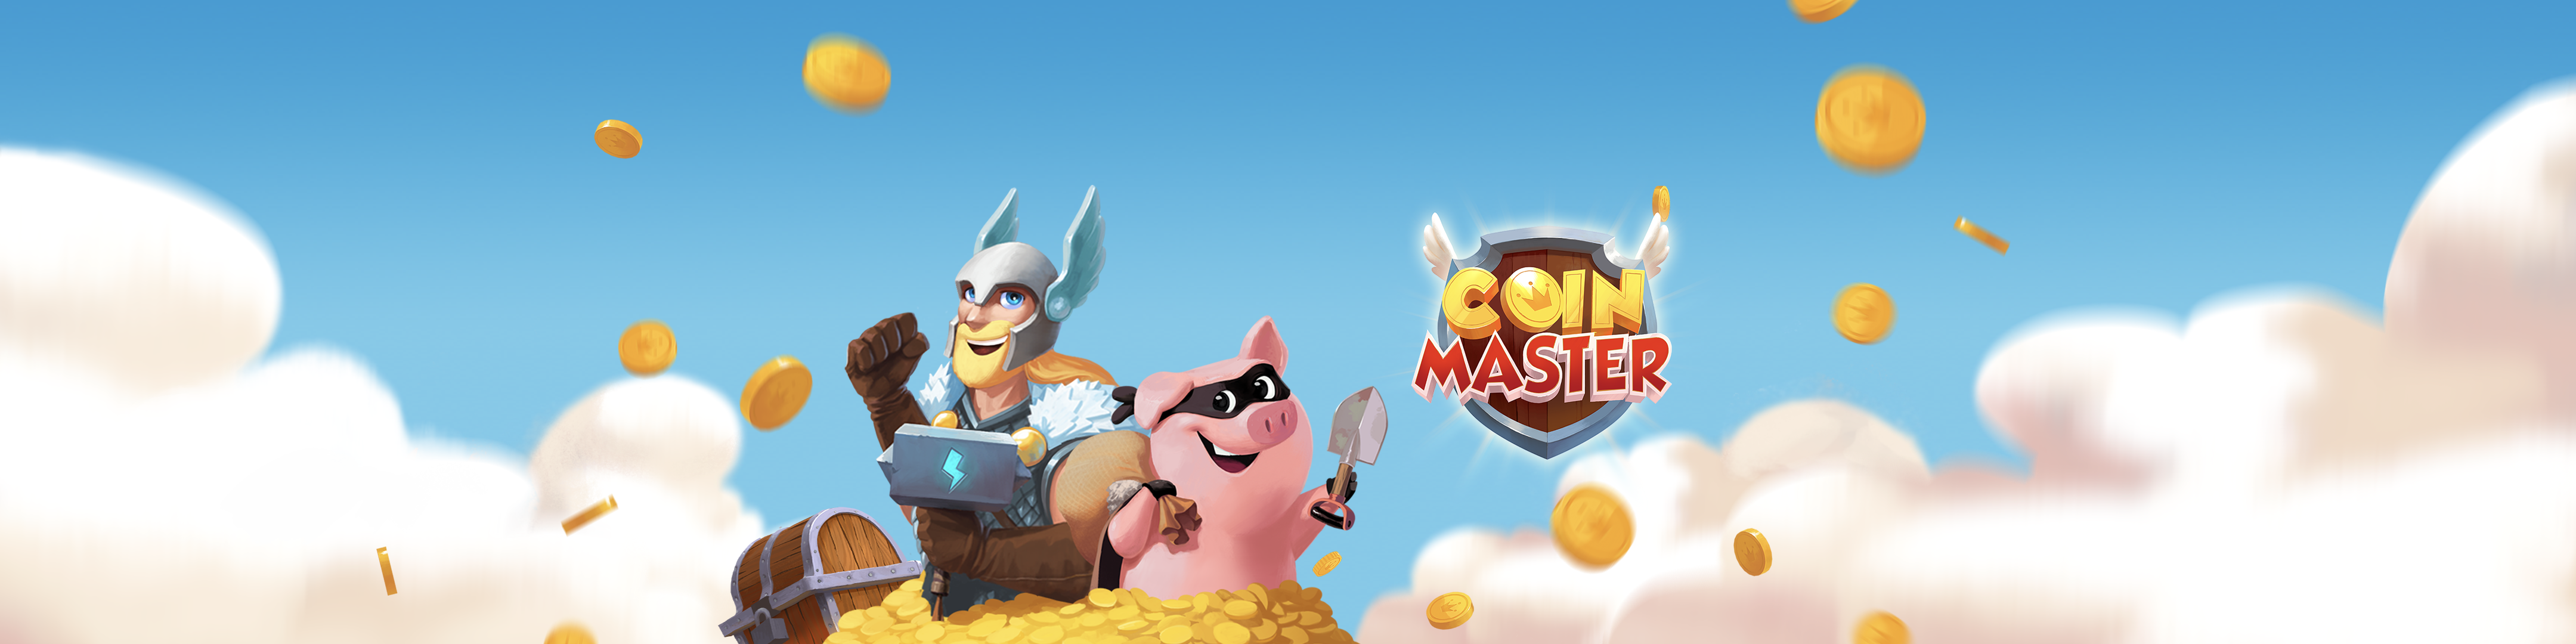 Coin Master Overview Apple App Store Us